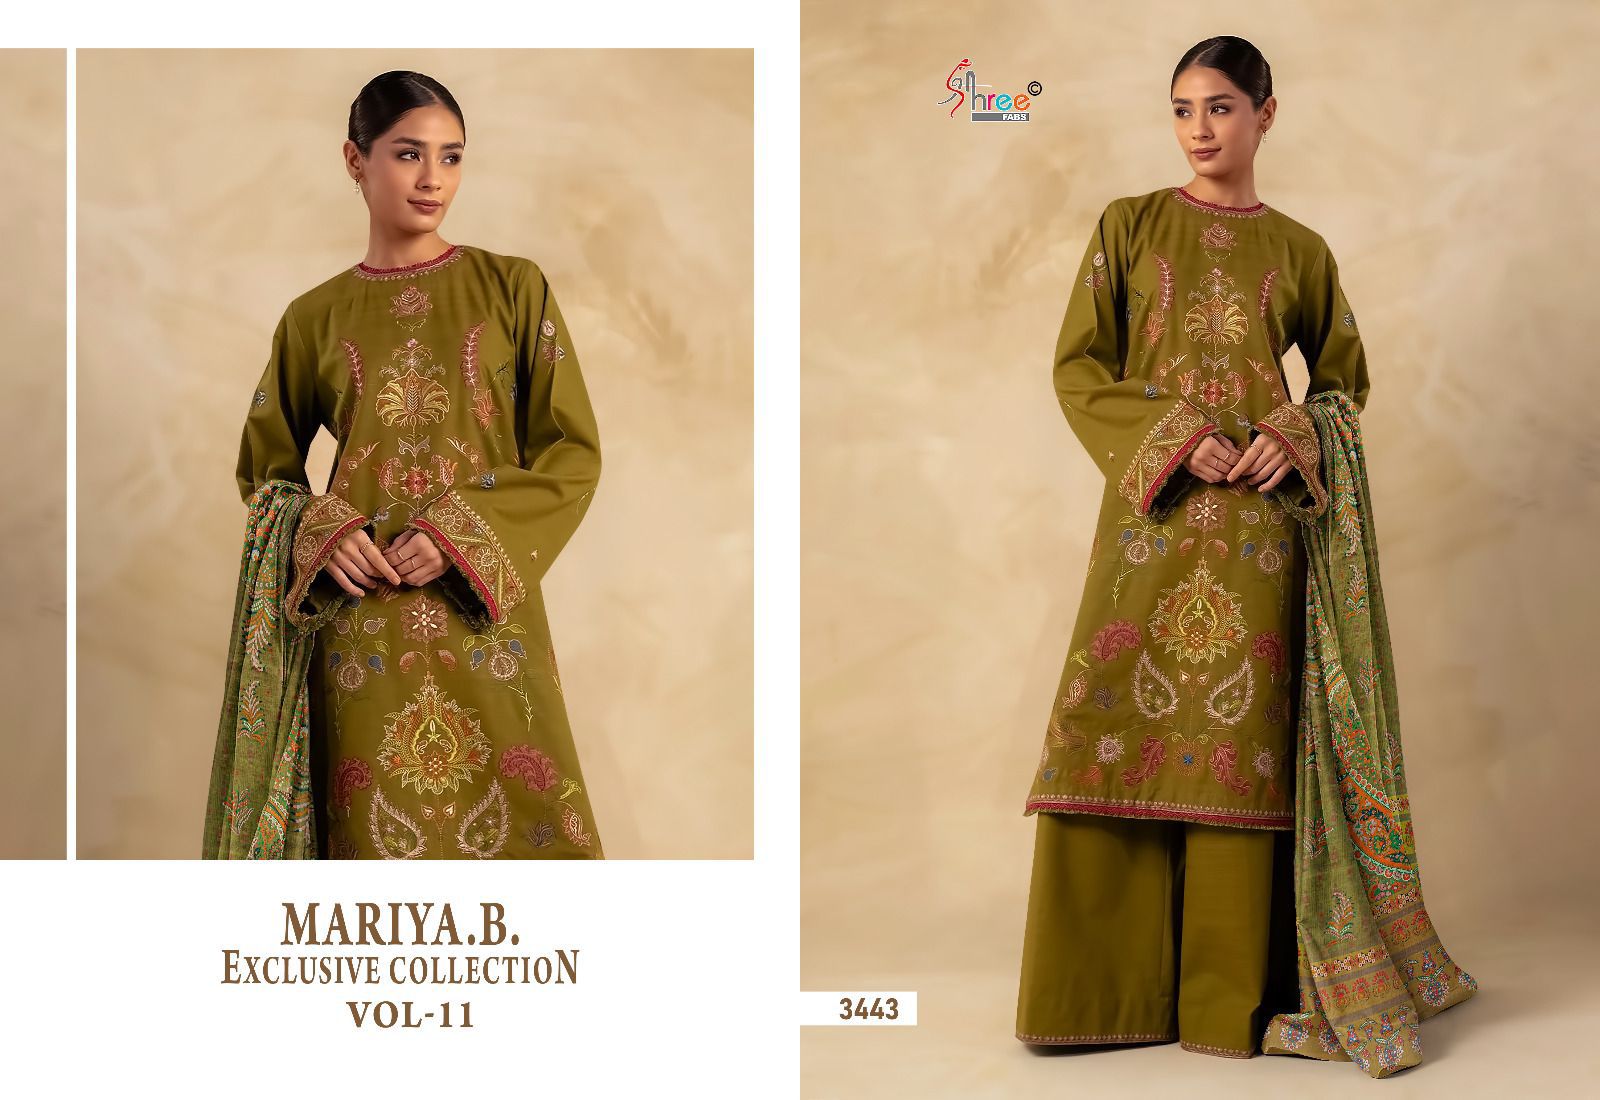 Shree Maria B Exclusive Collection Vol 11 collection 1